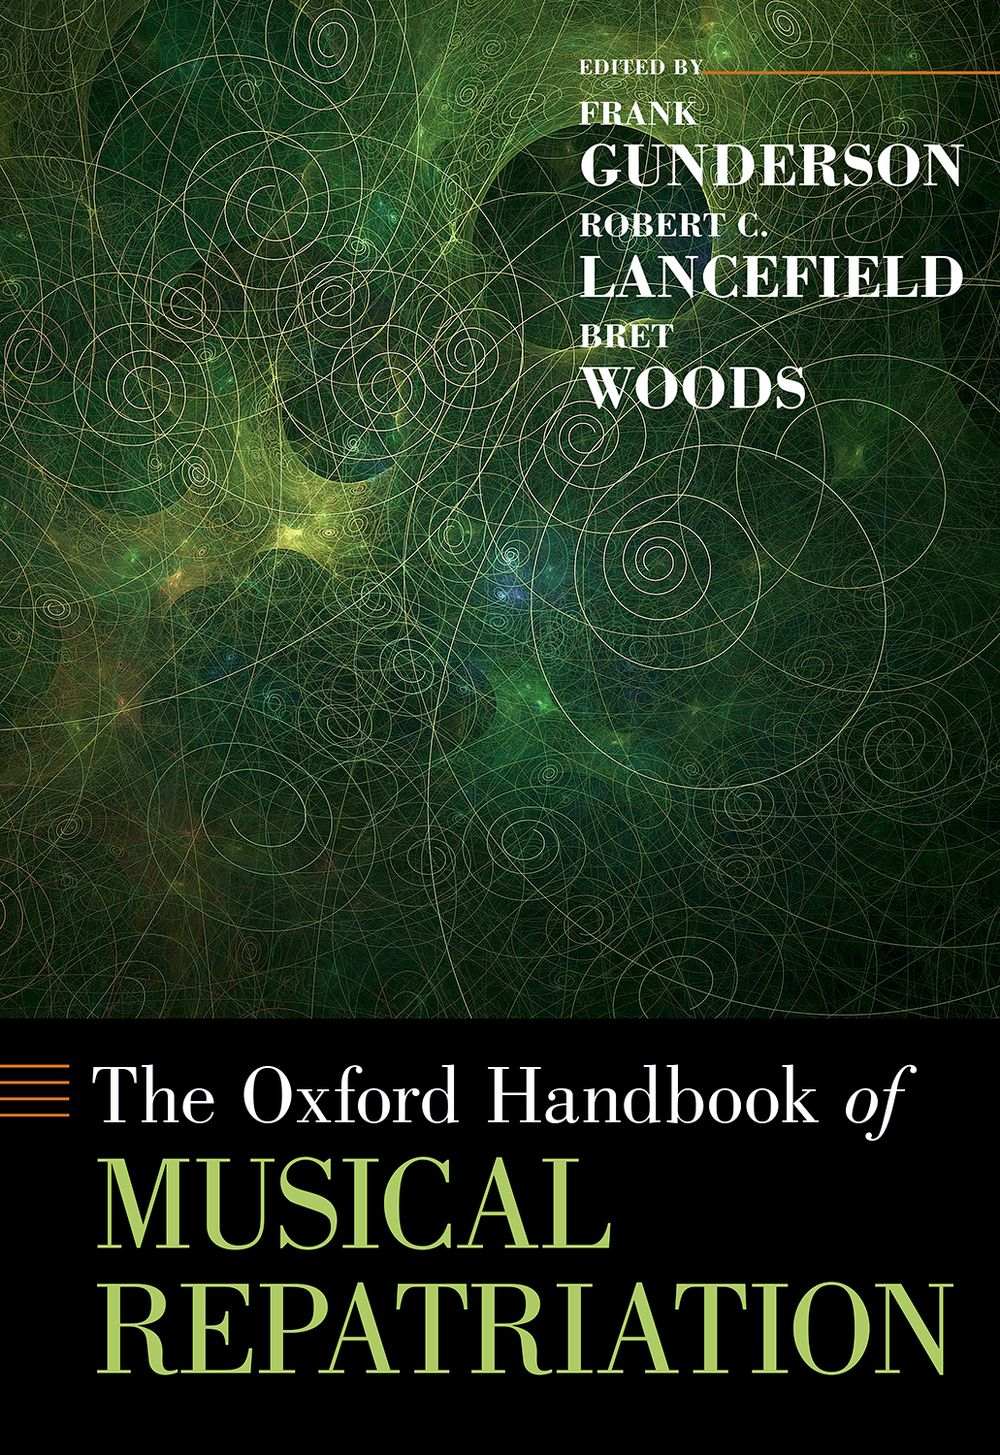 The Oxford Handbook of Musical Repatriation: Reference